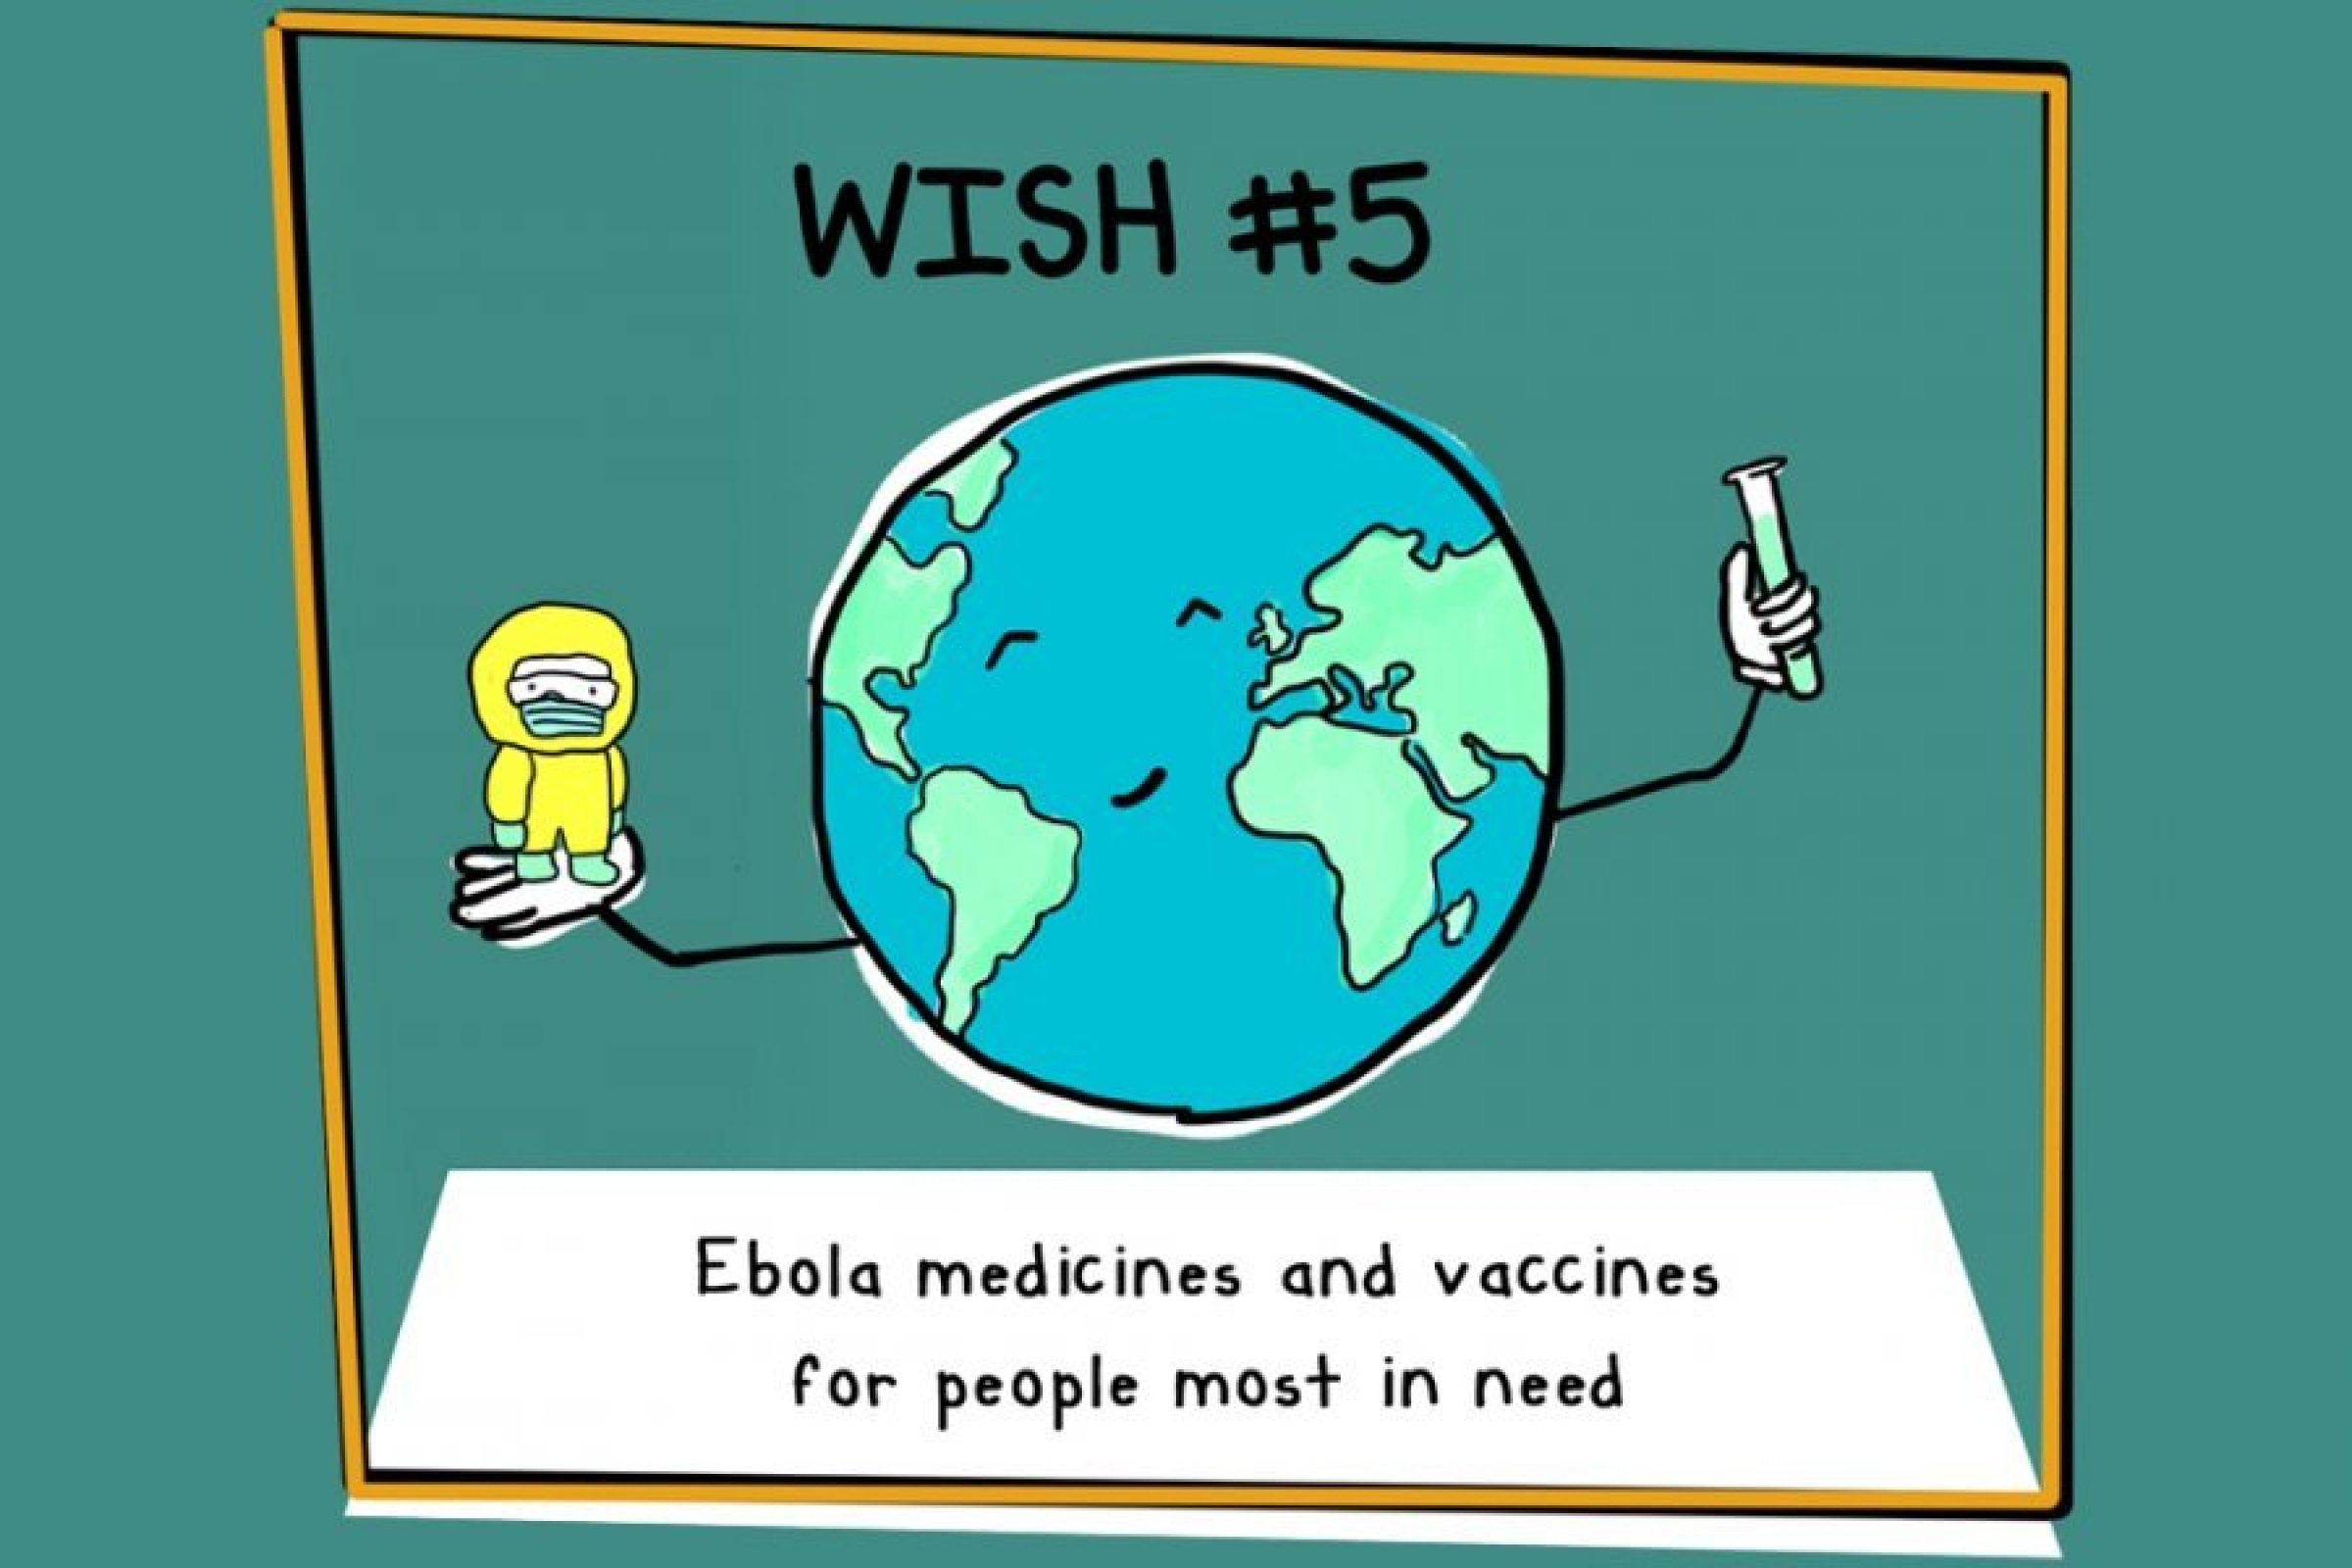 In 2020, we will work to ensure people at risk of Ebola get timely access to new medicines and vaccines - at affordable prices